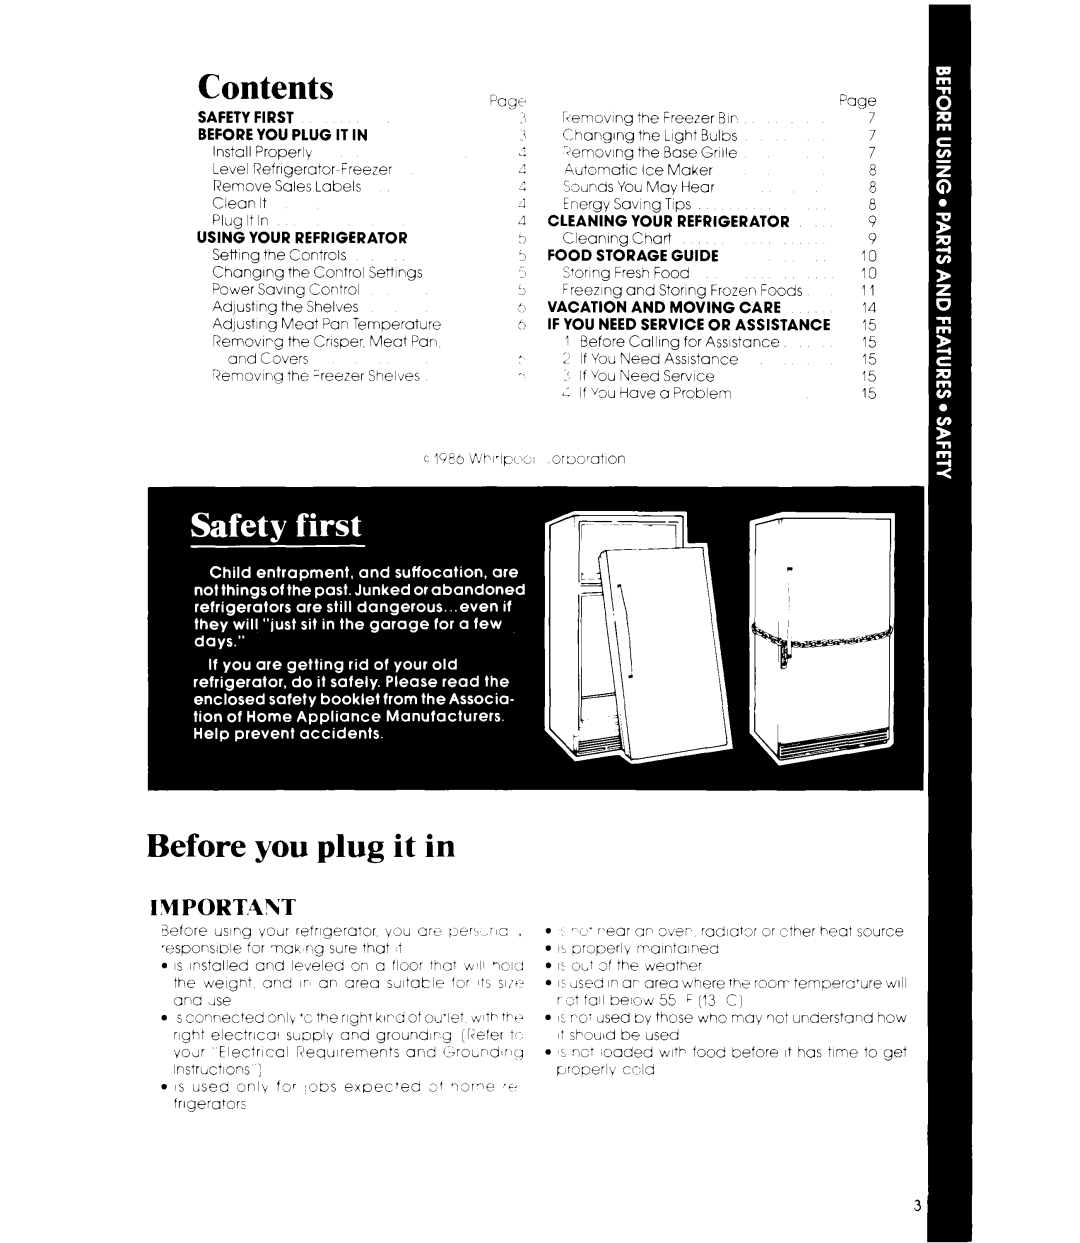 Whirlpool ED22ZM manual IMPORTz4NT, Contents 